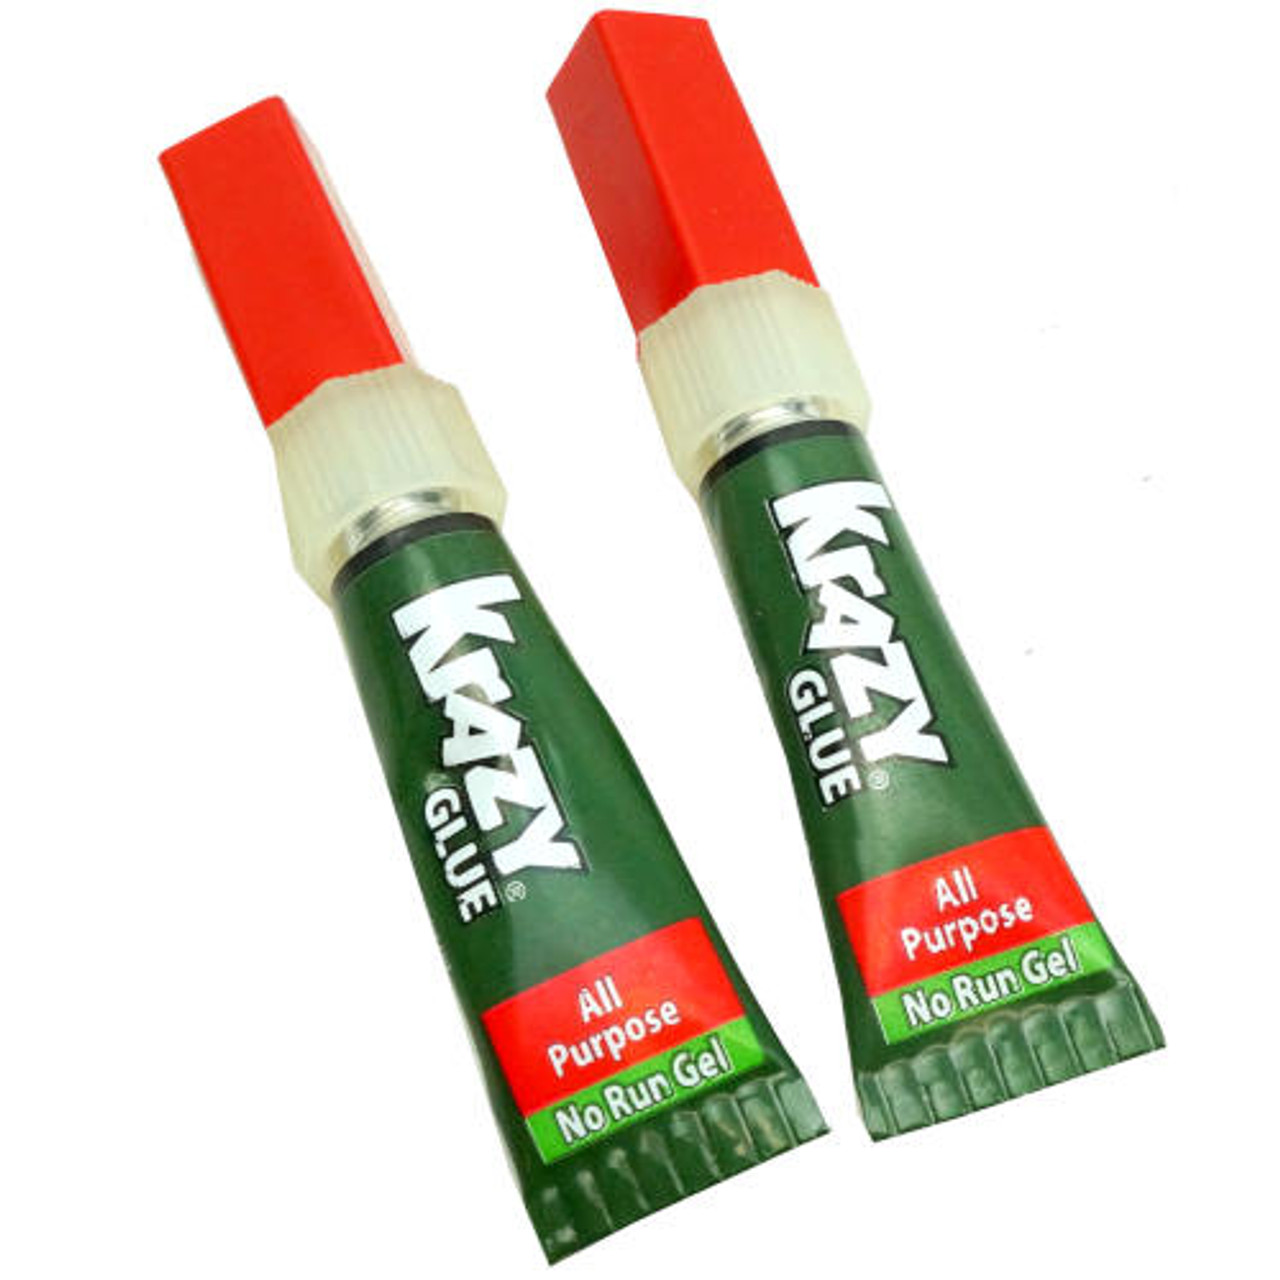 Krazy Glue All Purpose No Run Gel - Midwest Technology Products